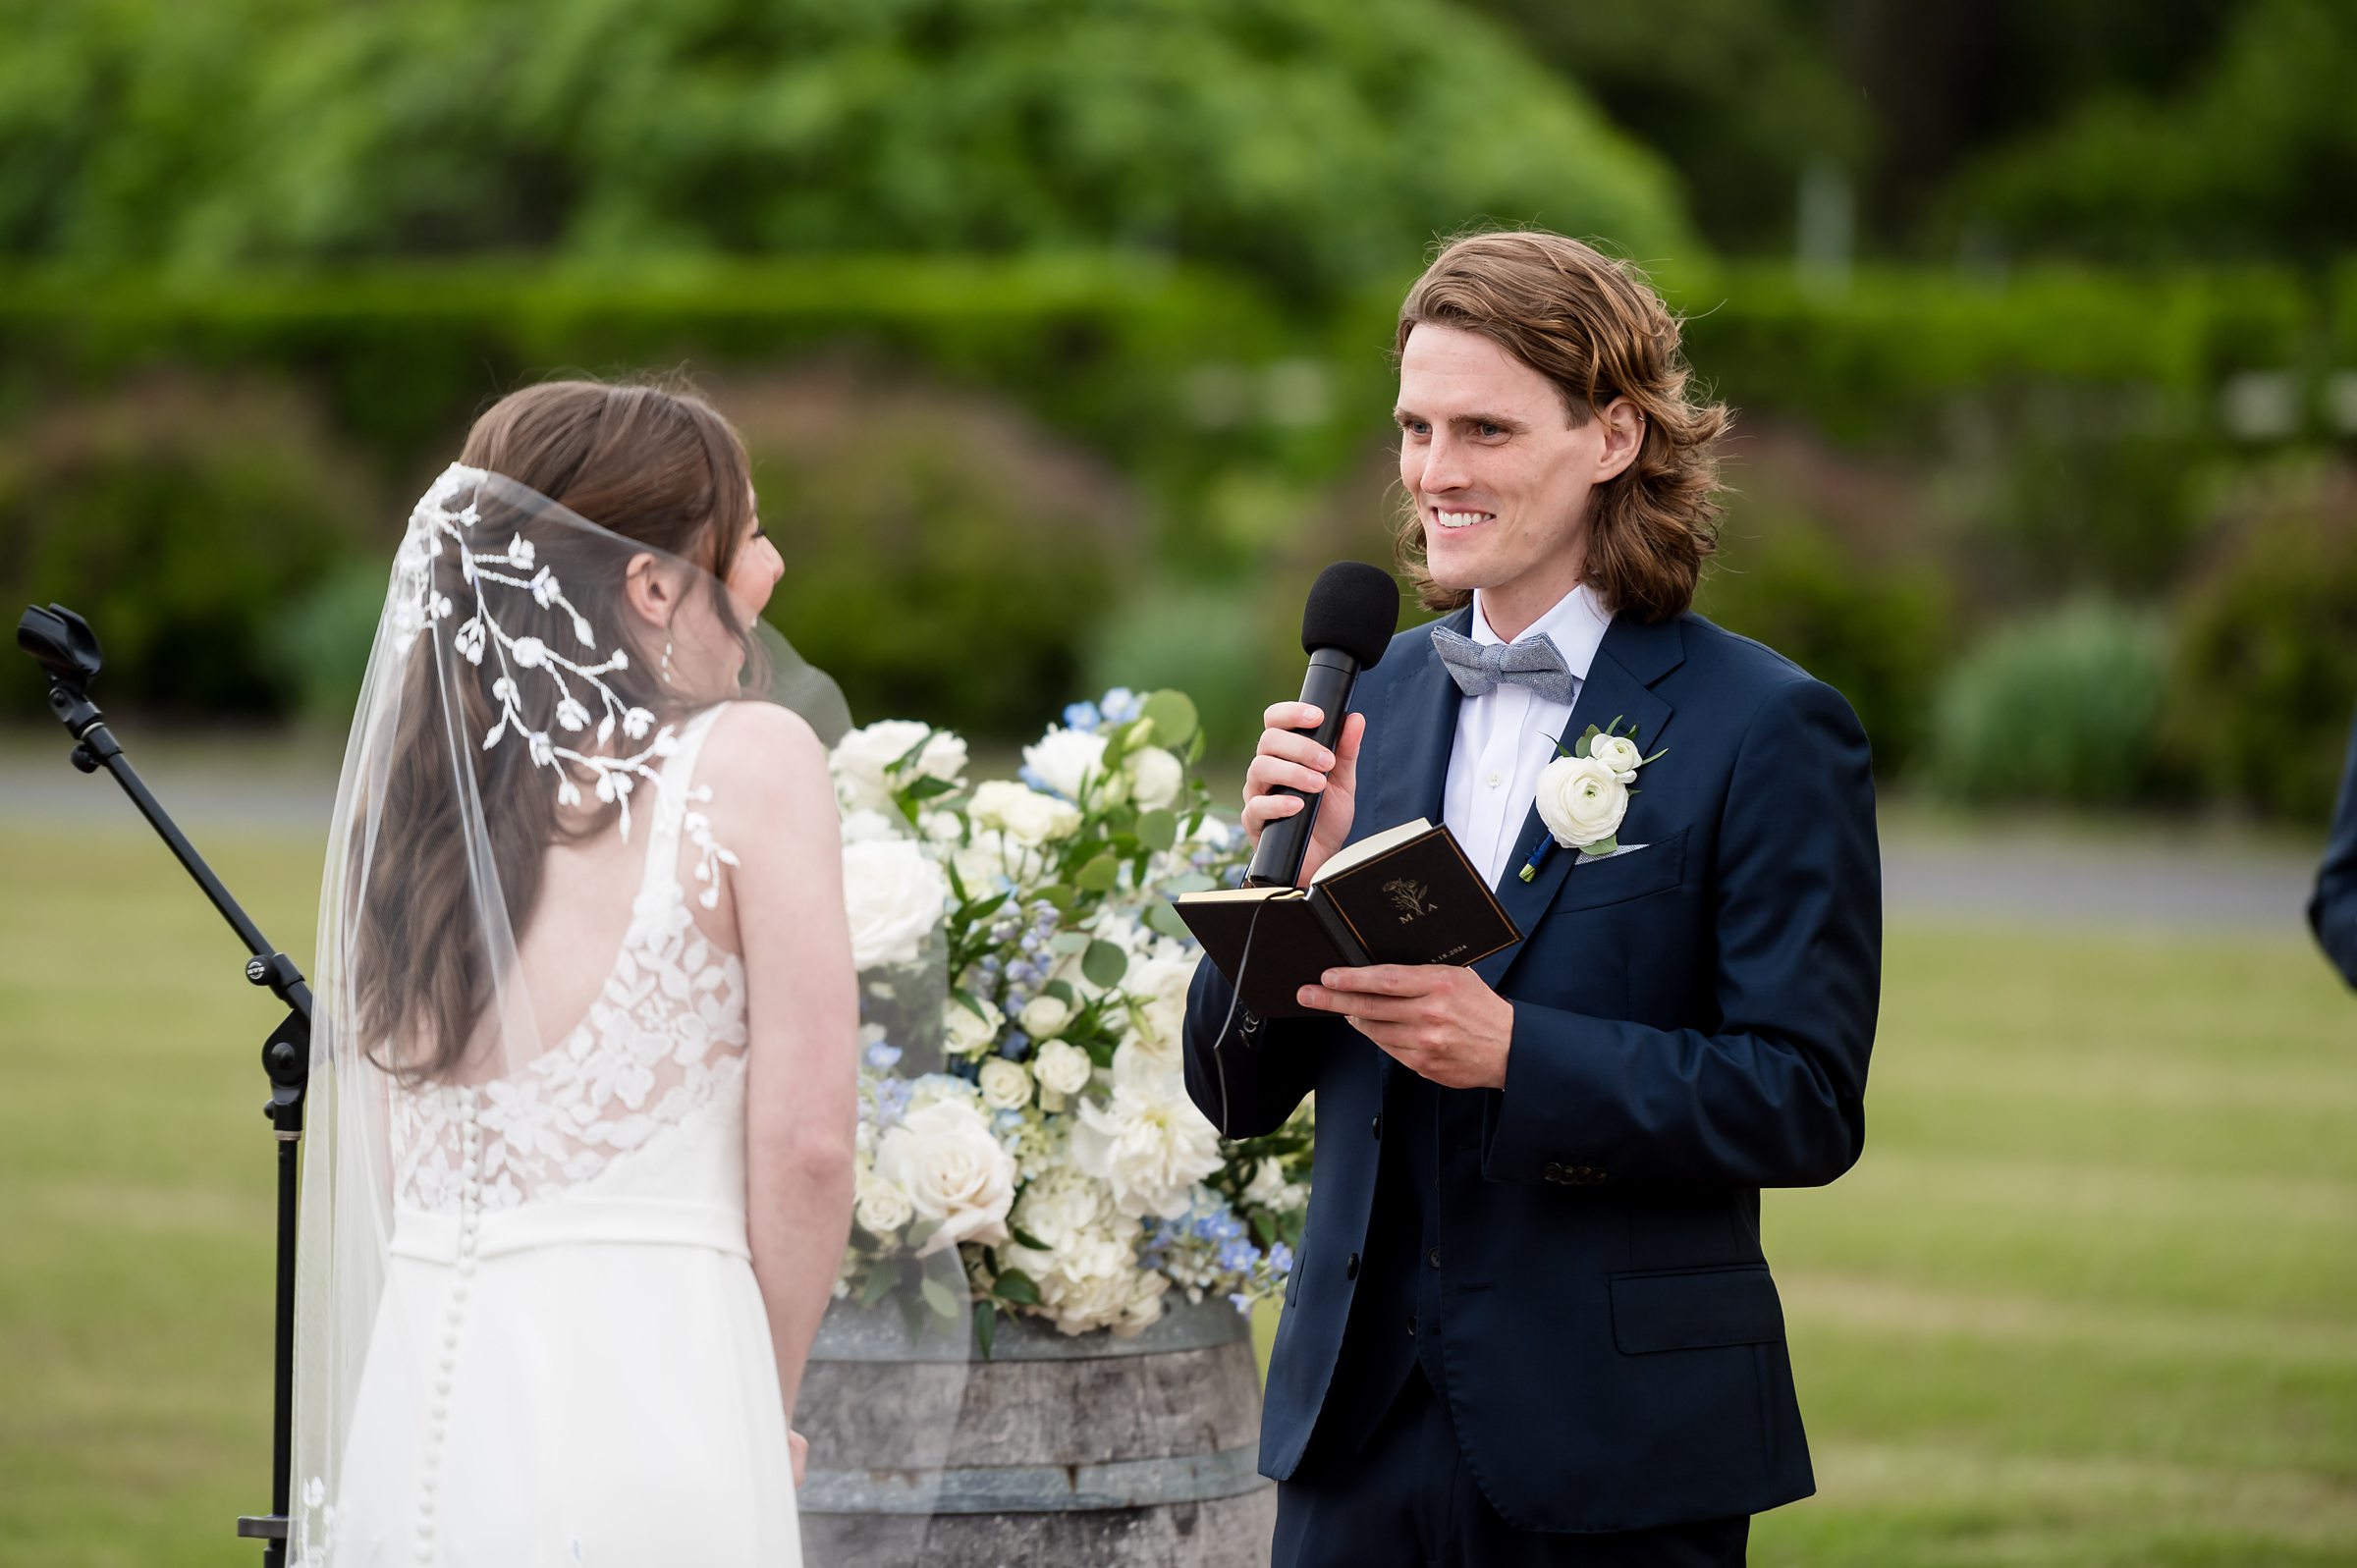 A groom in a navy suit and bow tie reads from a book during an outdoor wedding ceremony. The bride, with a veil and white dress featuring lace details, faces him. Flowers and greenery are in the background.